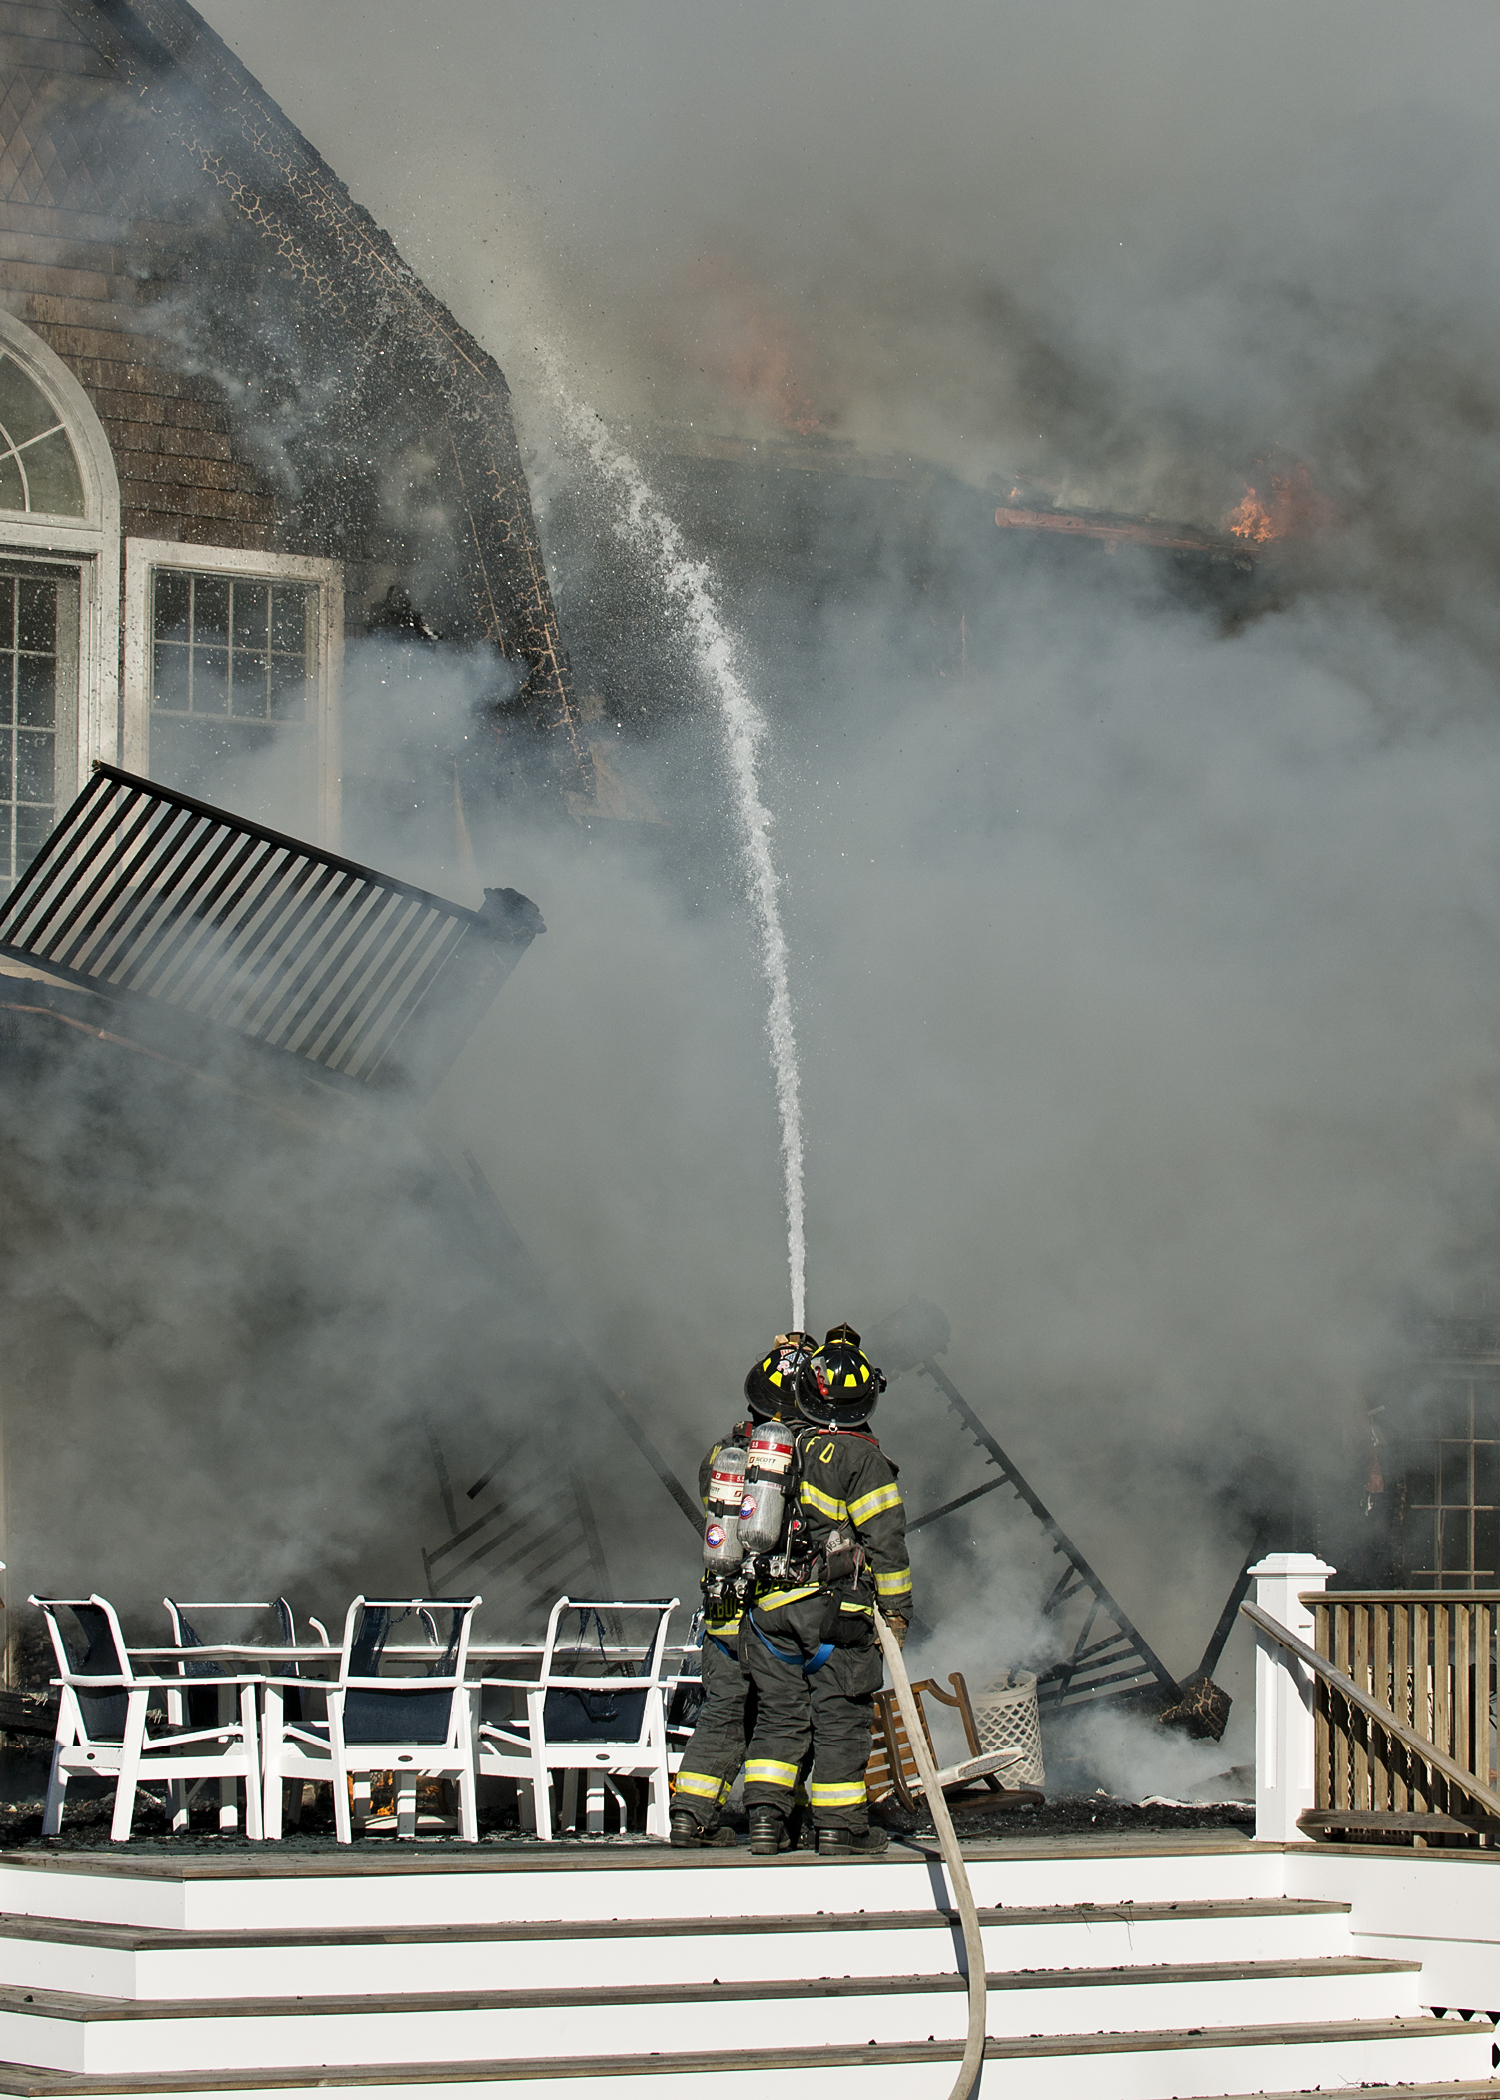 Firefighters atttacking the flames at a home on Michaels Way in Westhampton Beach yesterday afternoon.